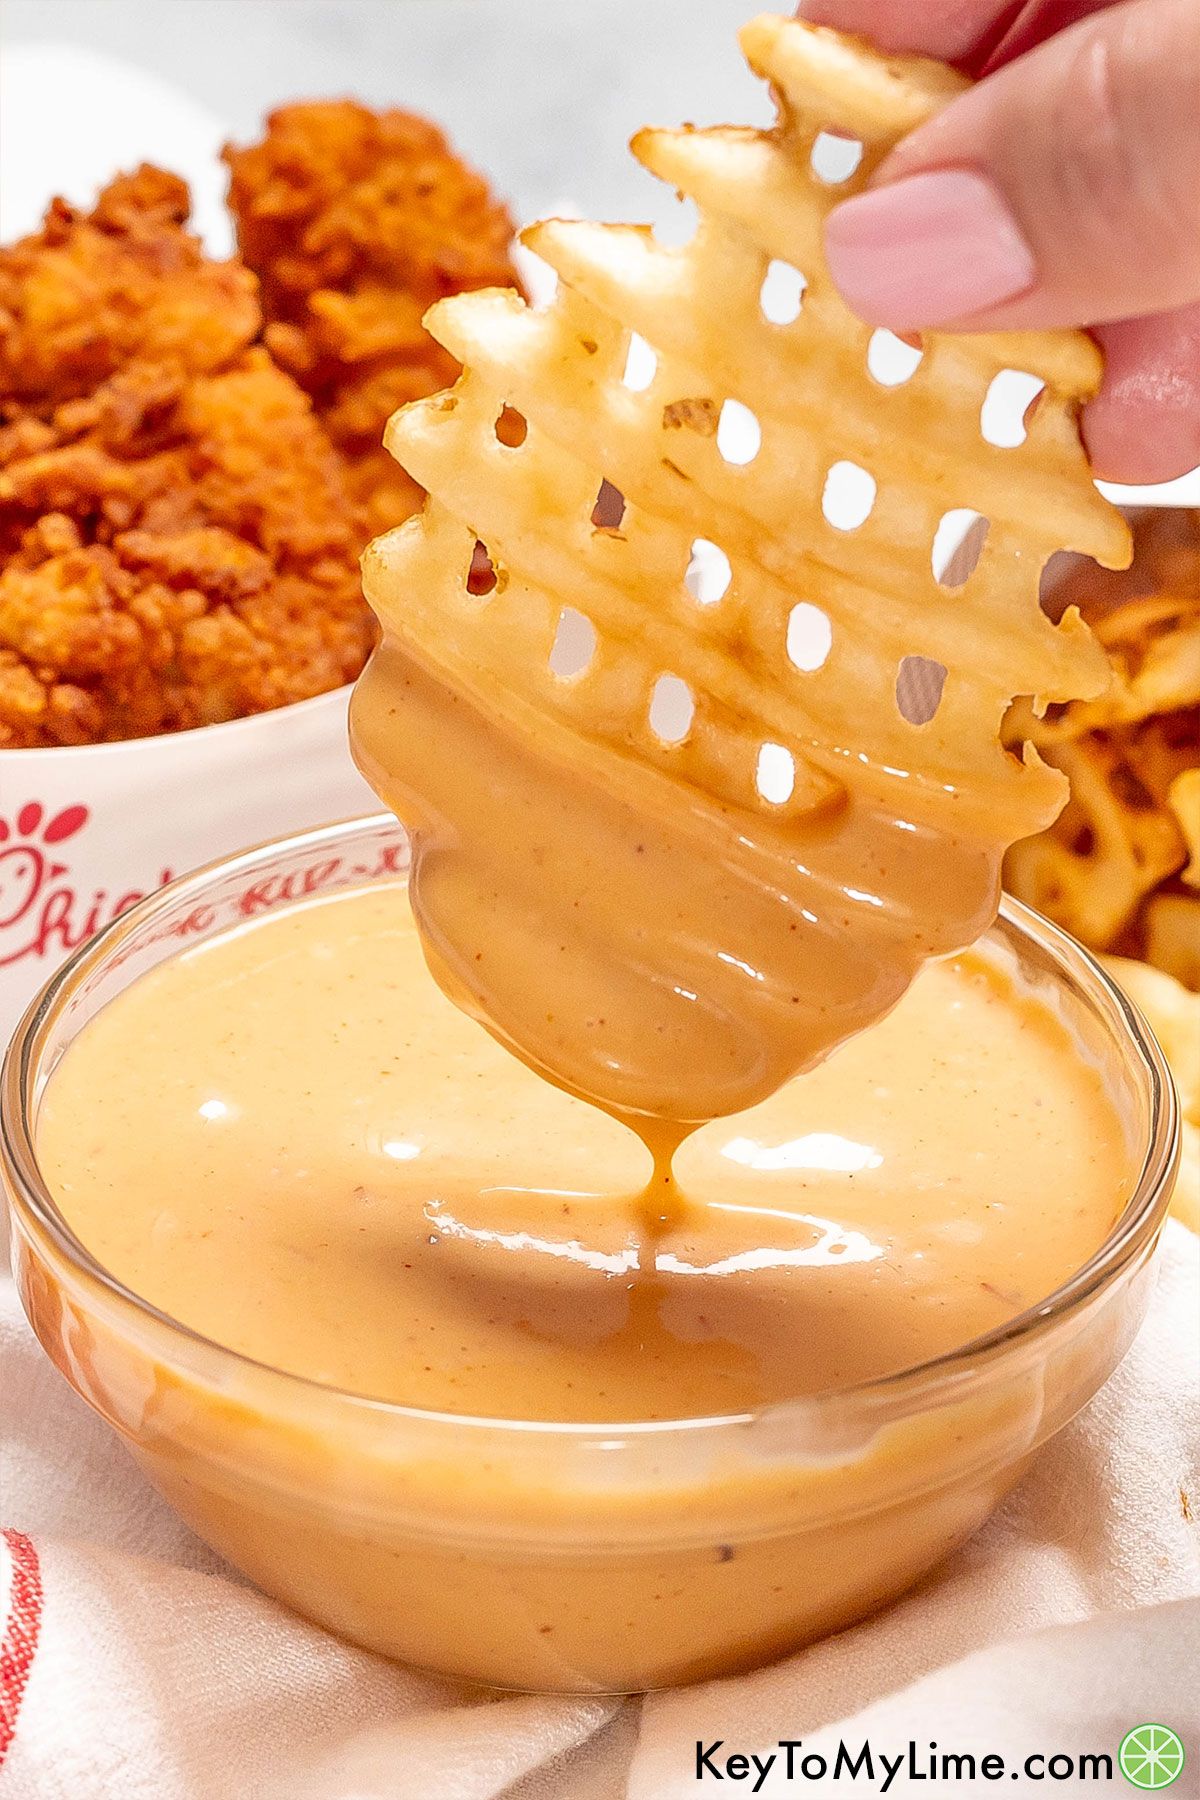 Homemade Chick Fil A sauce dripping off of a waffle fry.